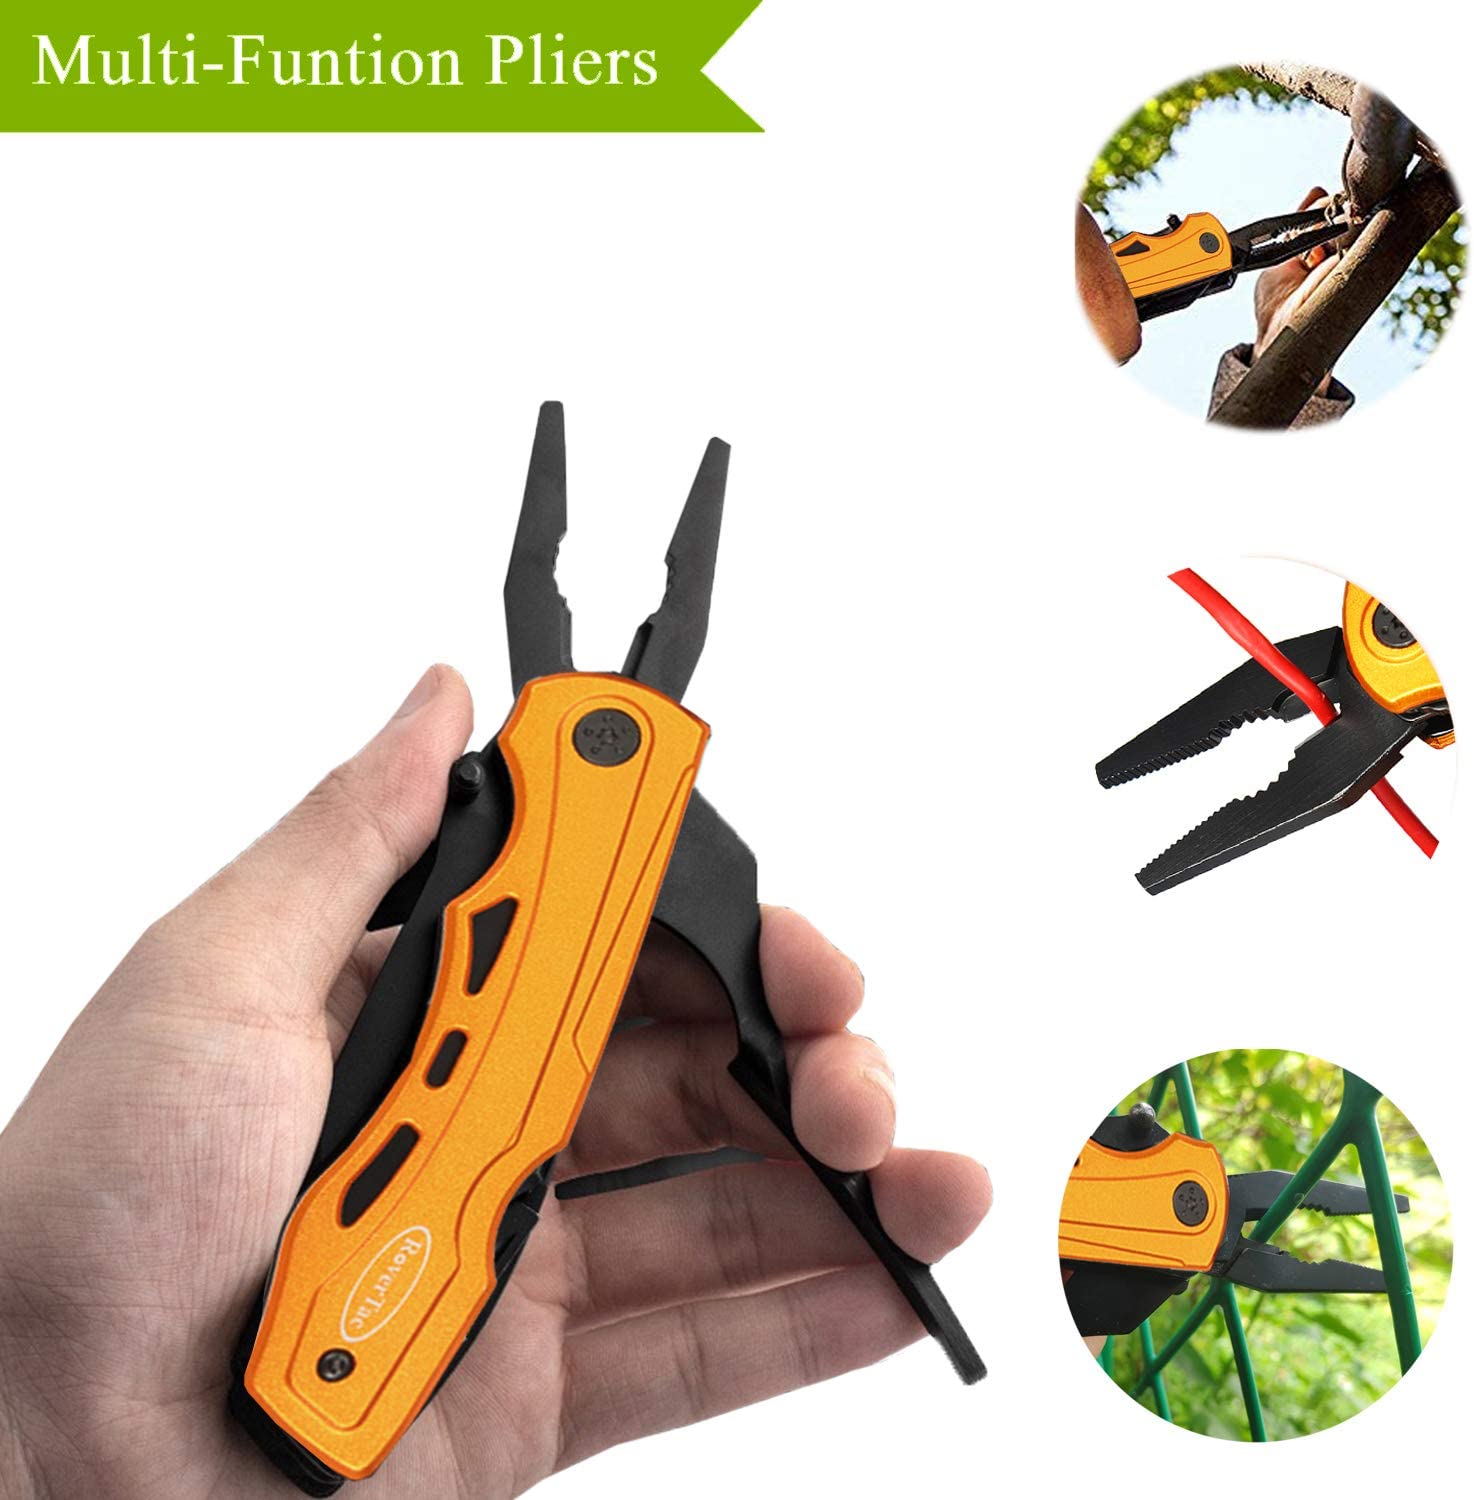 DC Multitool Folding Knife with Safety Lock-Gold  for Camping Fishing Hiking Adventuring